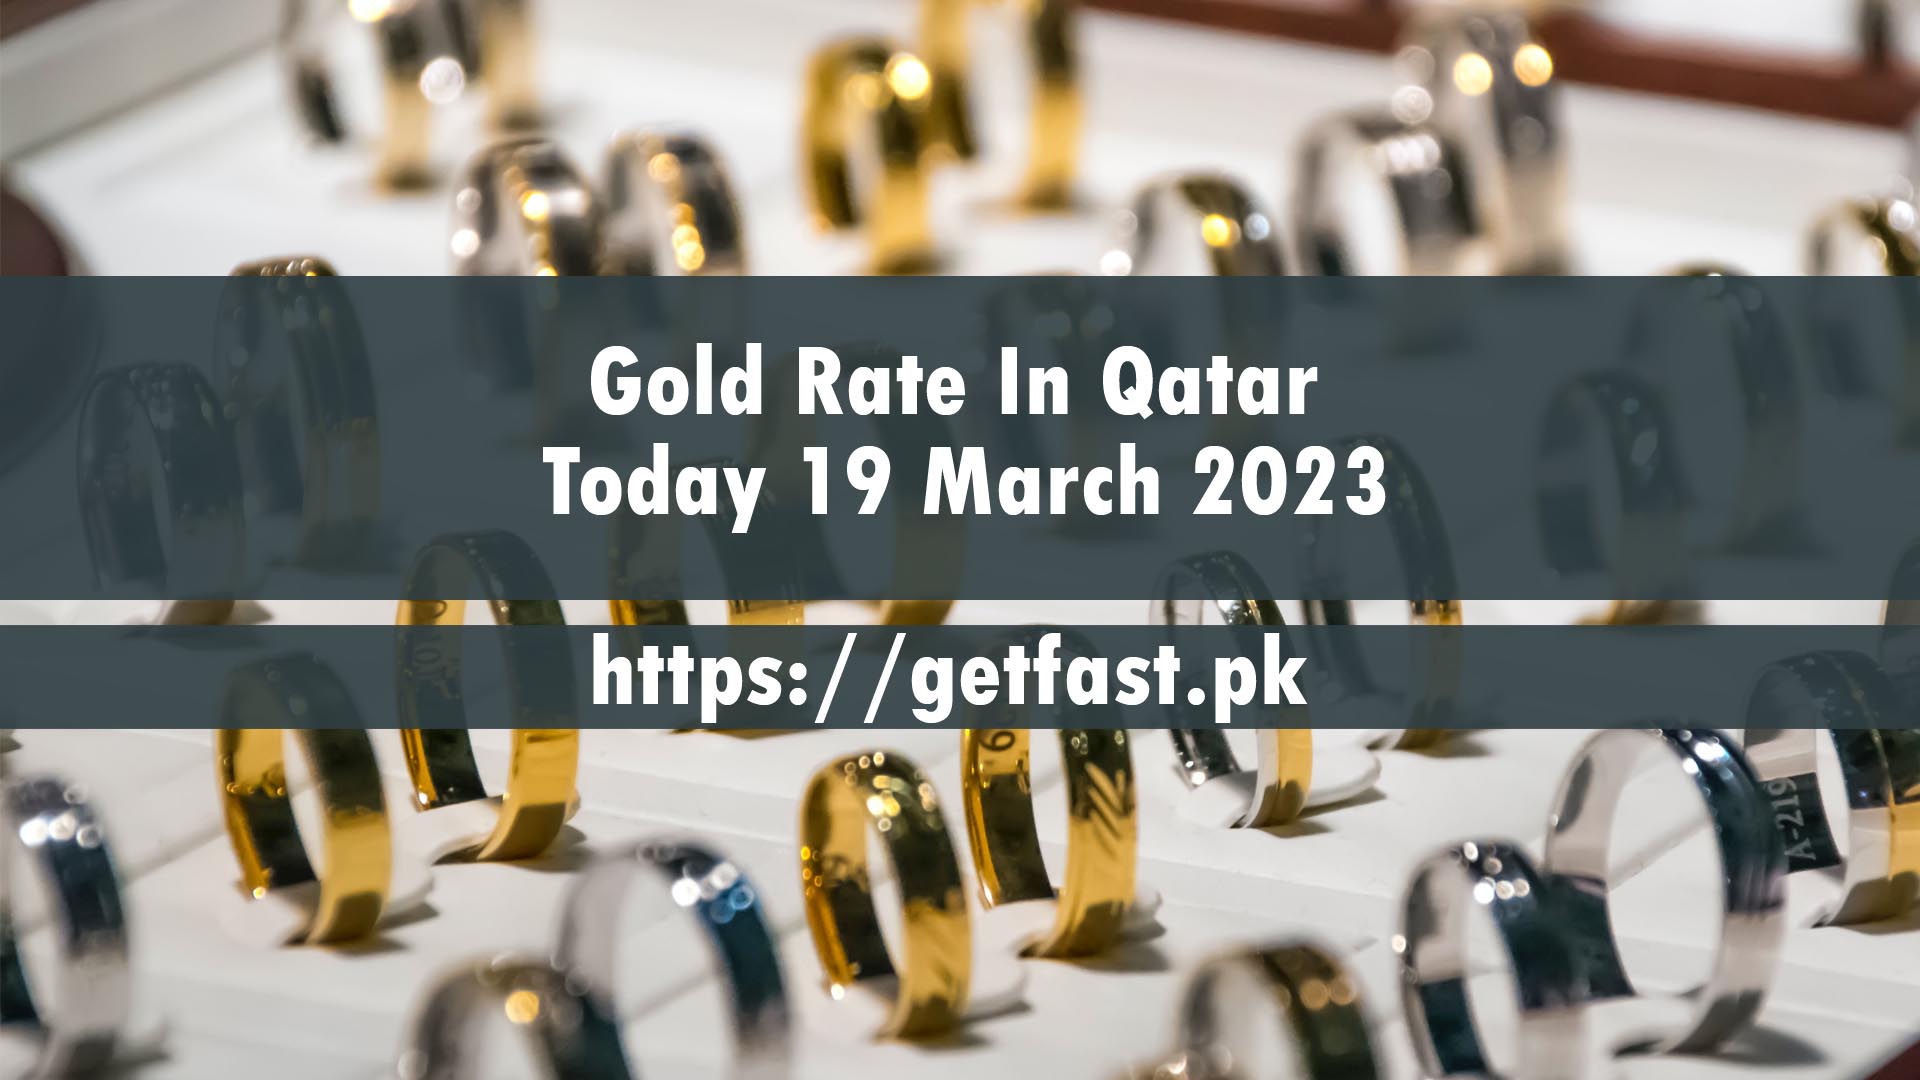 Gold Rate In Qatar Today 19 March 2023